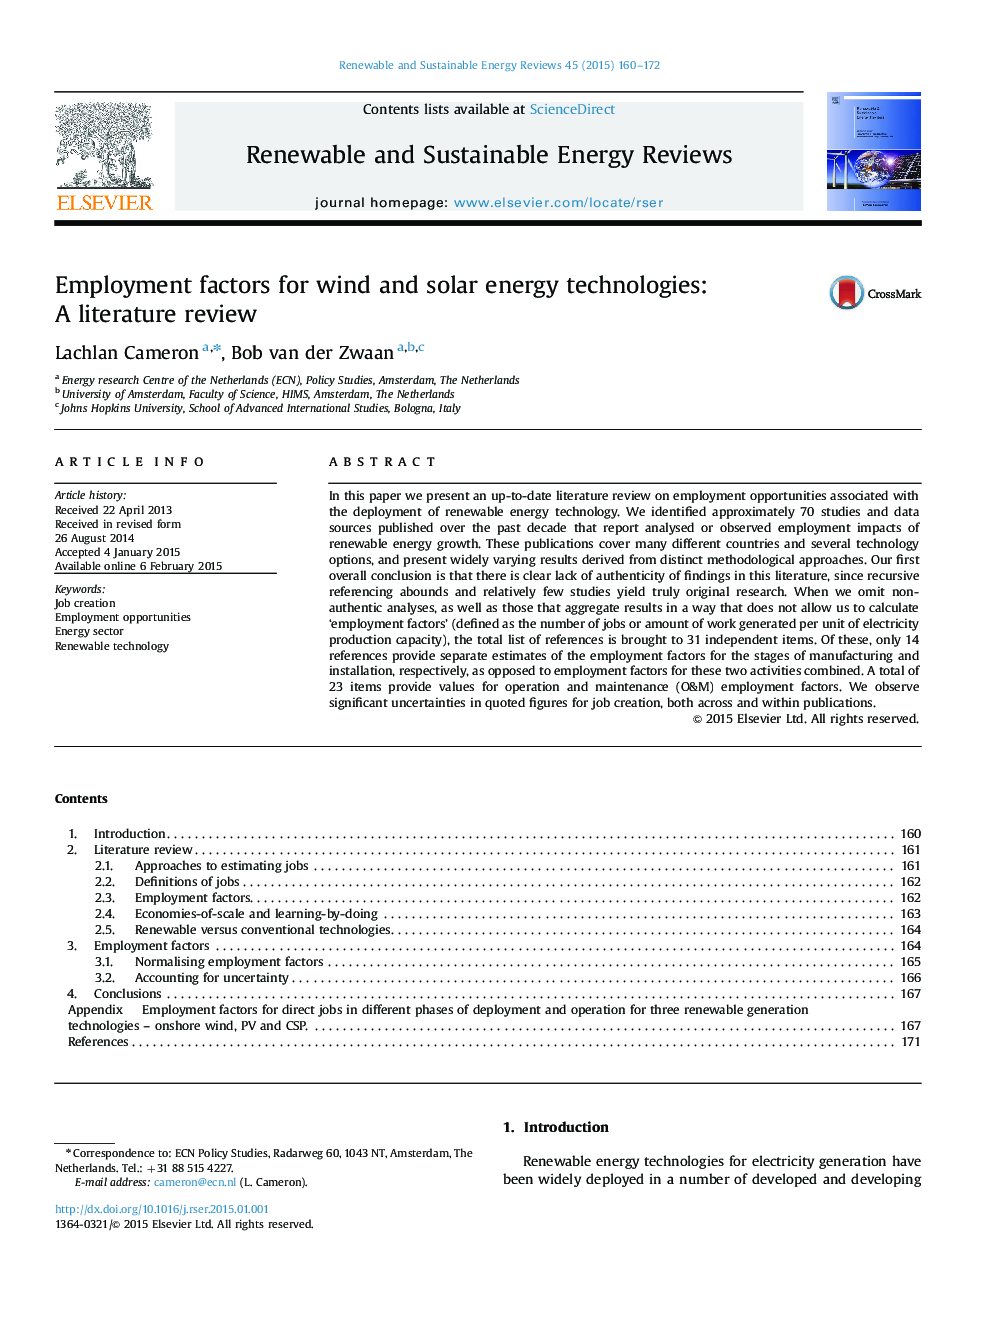 Employment factors for wind and solar energy technologies: A literature review